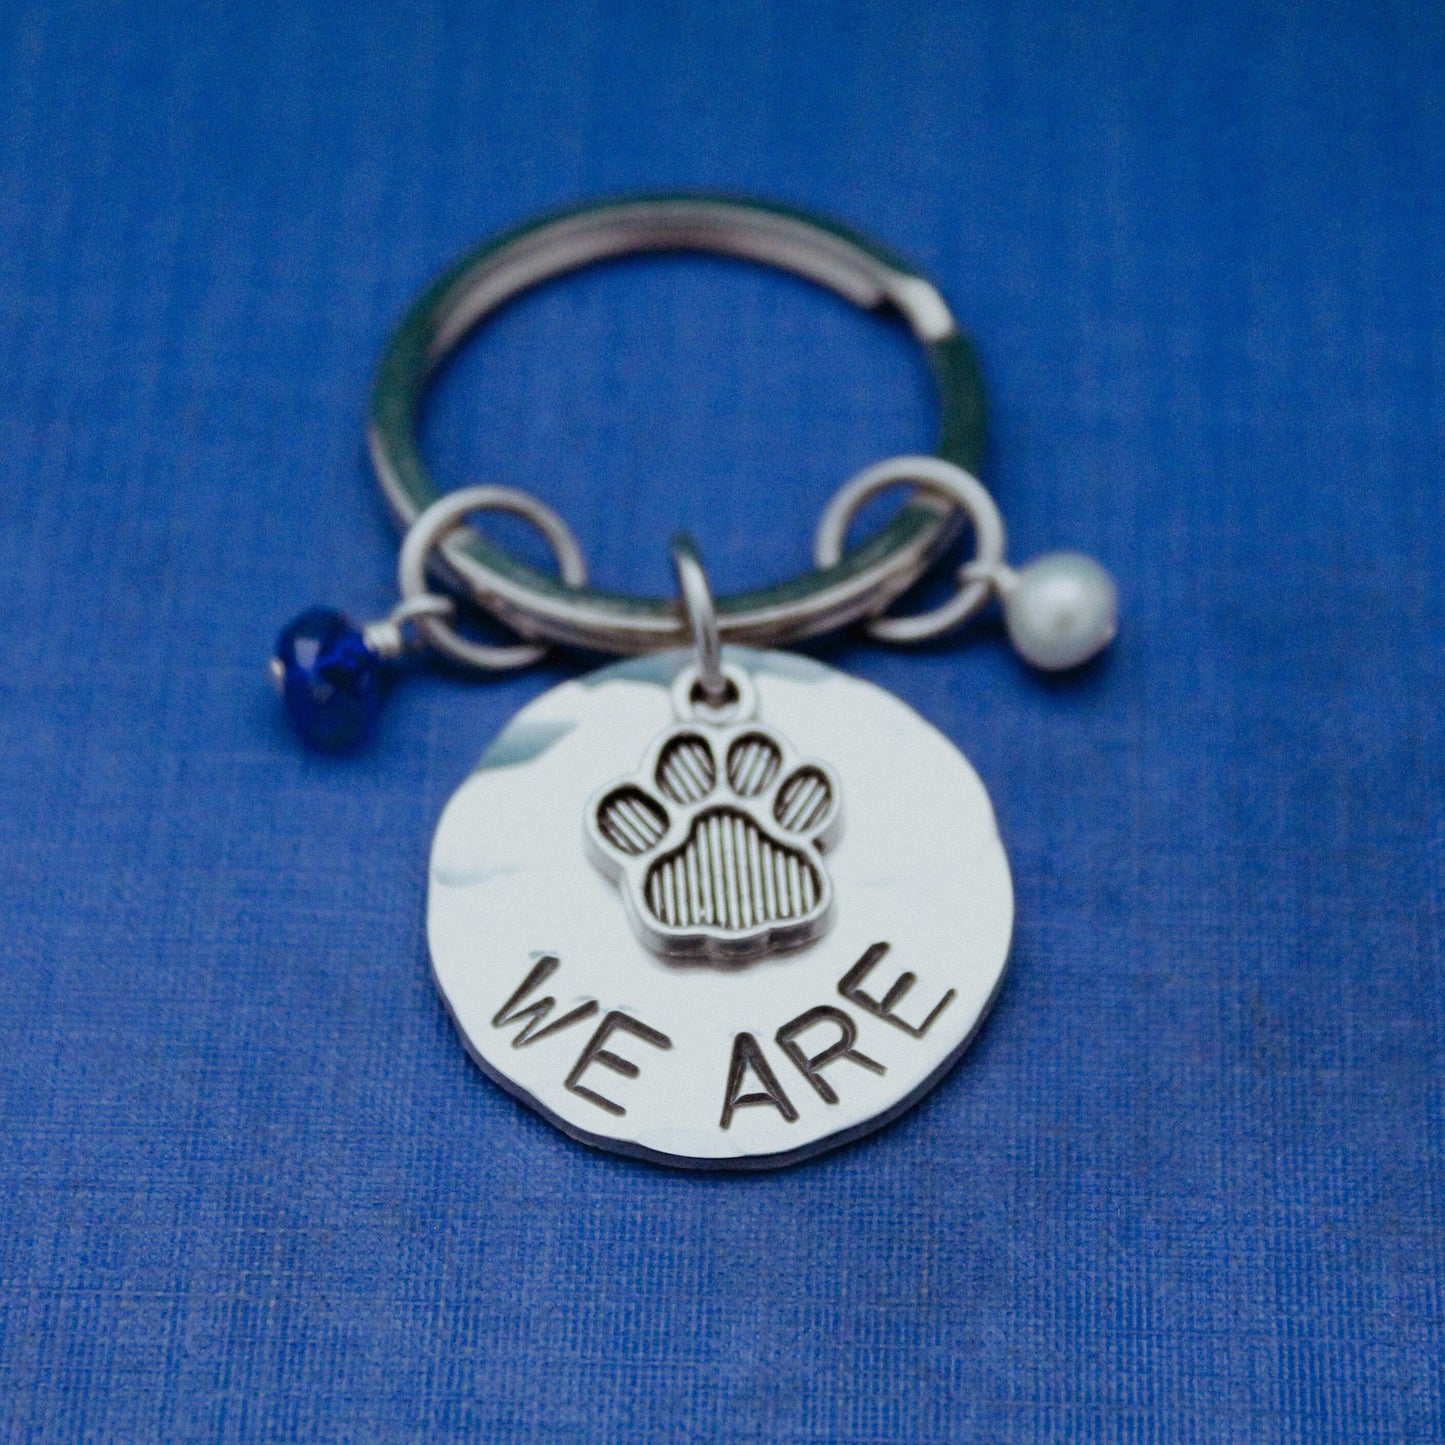 We Are Keychain, Penn State Keychain, Nittany Lions Gift, PSU Grad Gift, Graduation Gift for Penn State, Hand Stamped Jewelry